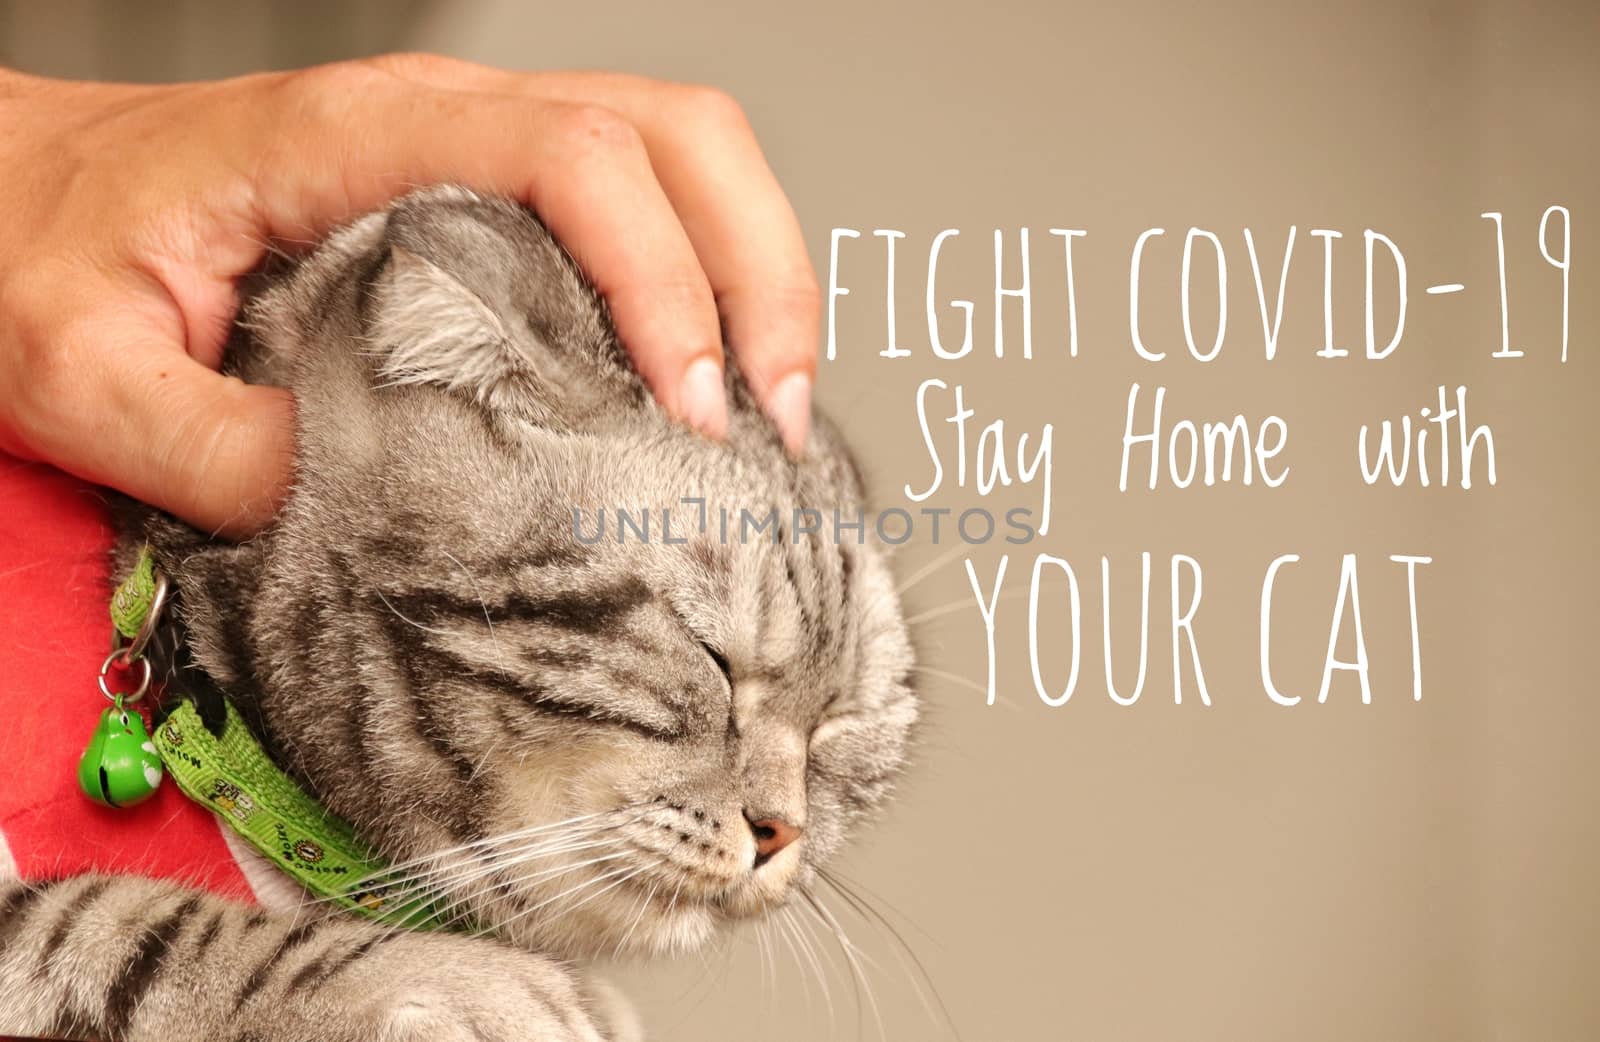 Close up of a cat face with the message to fight covid-19 by staying home with your pet